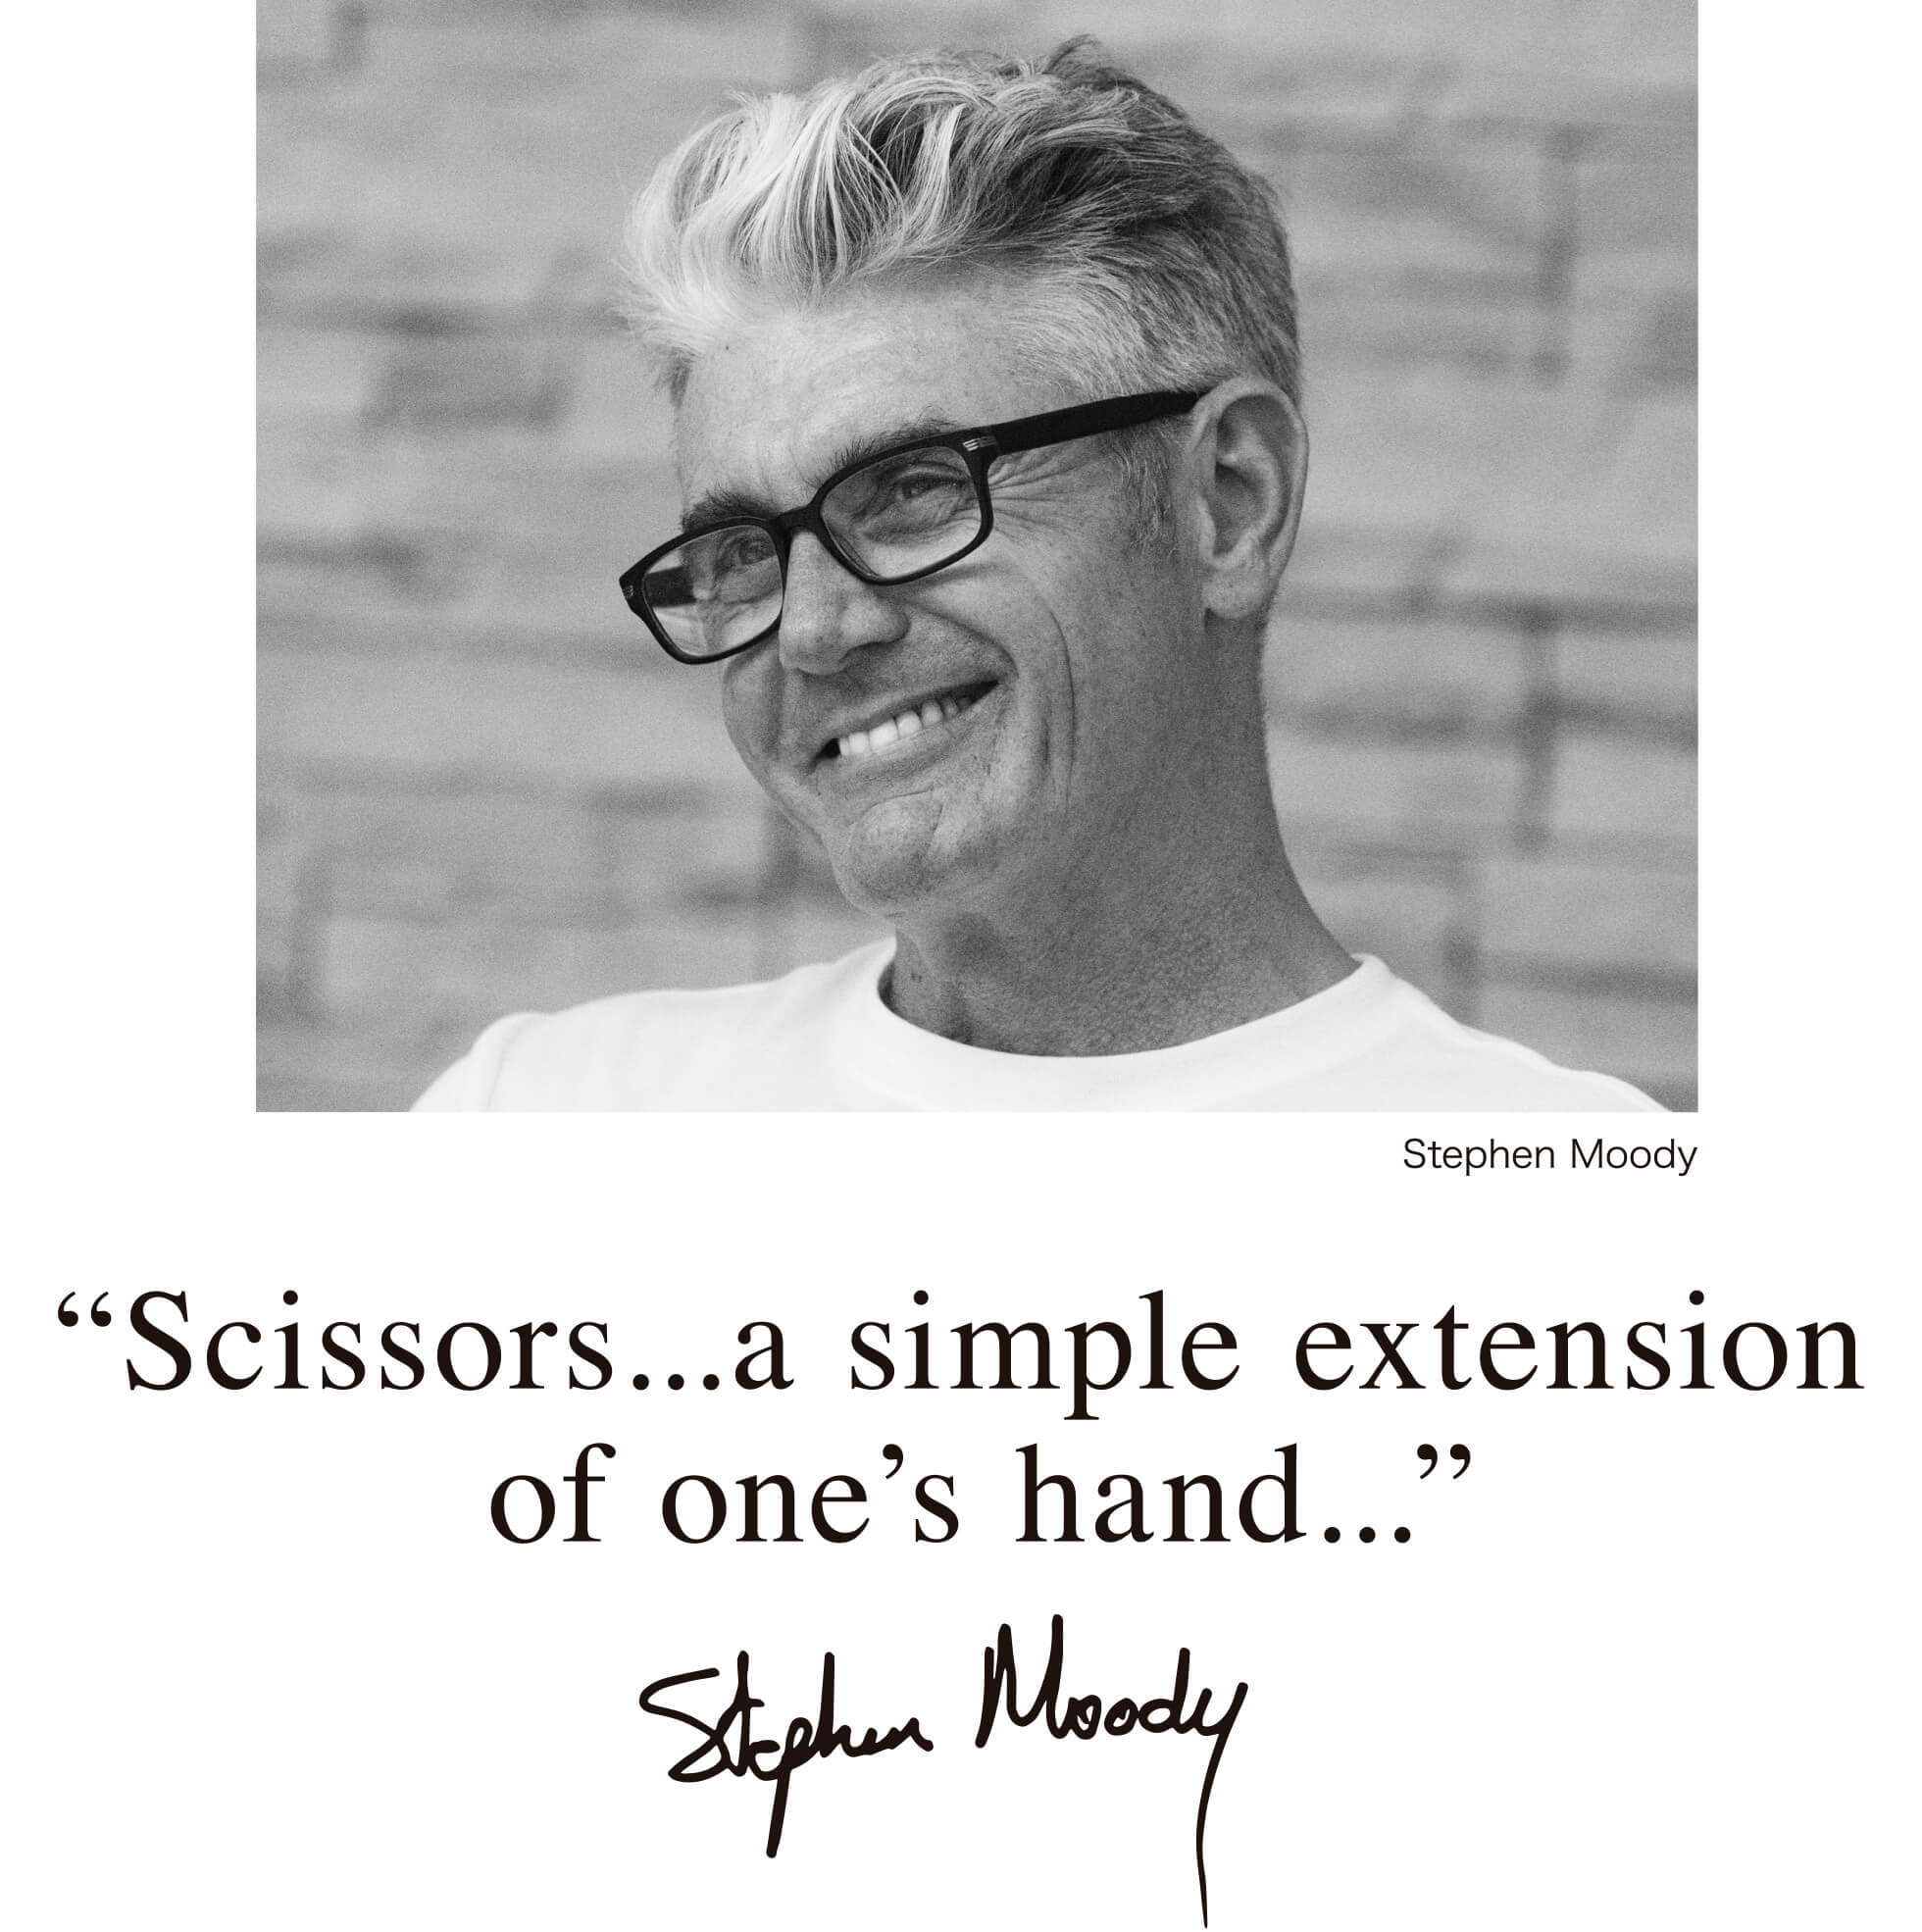 Stephen Moody Scissors...a simple extension of one’s hand